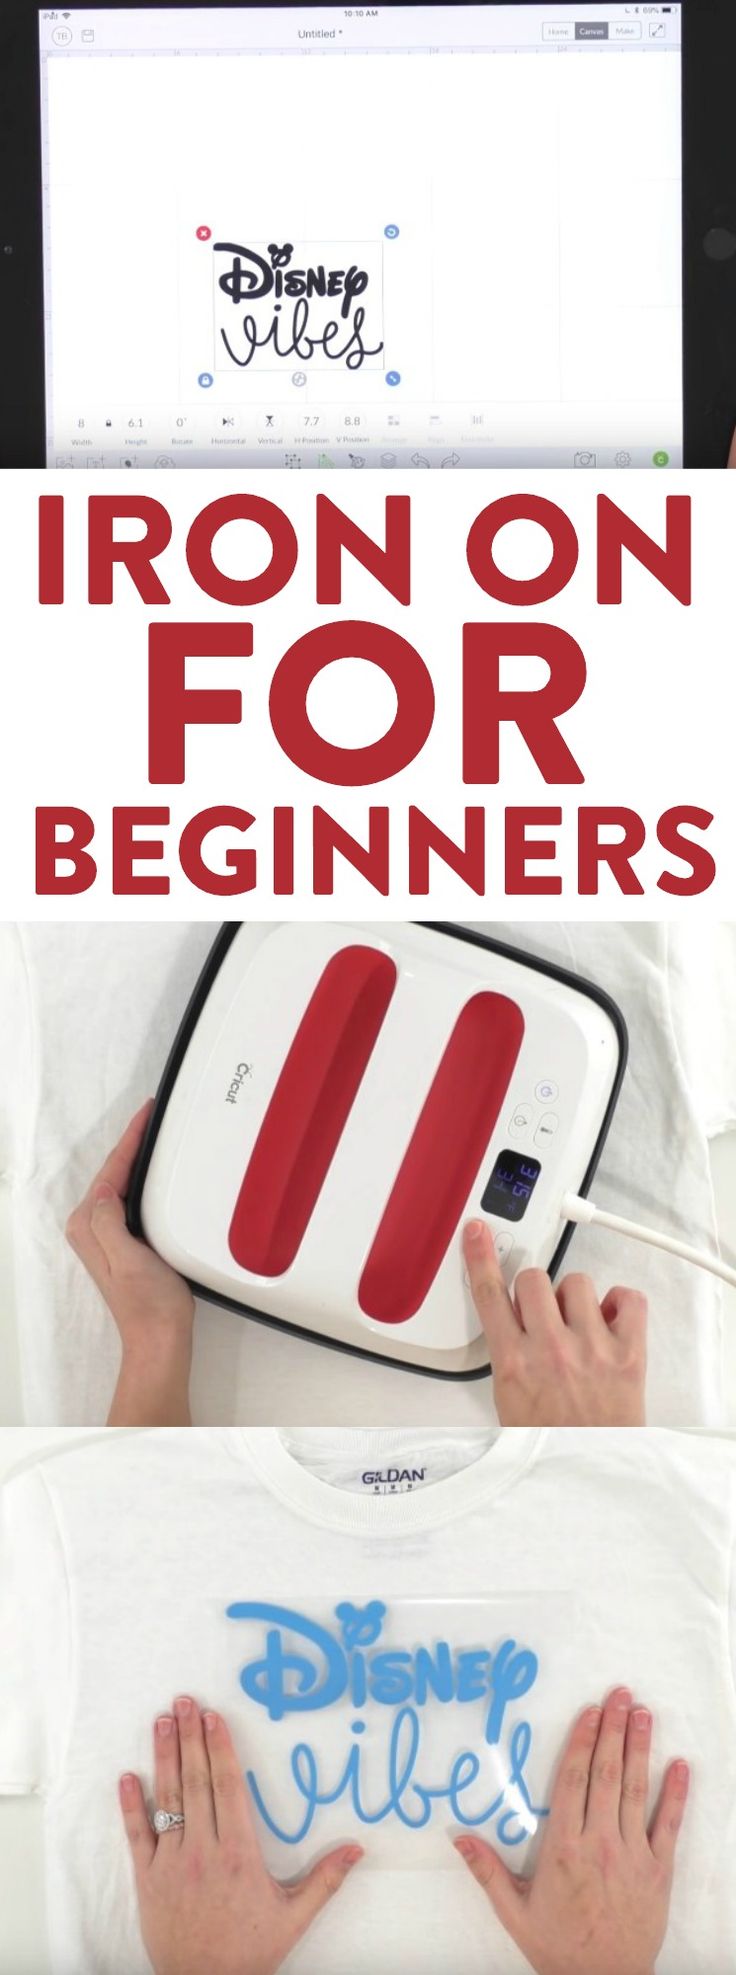 Today on the blog, we’re going to show you how to Iron on For Beginners. There...